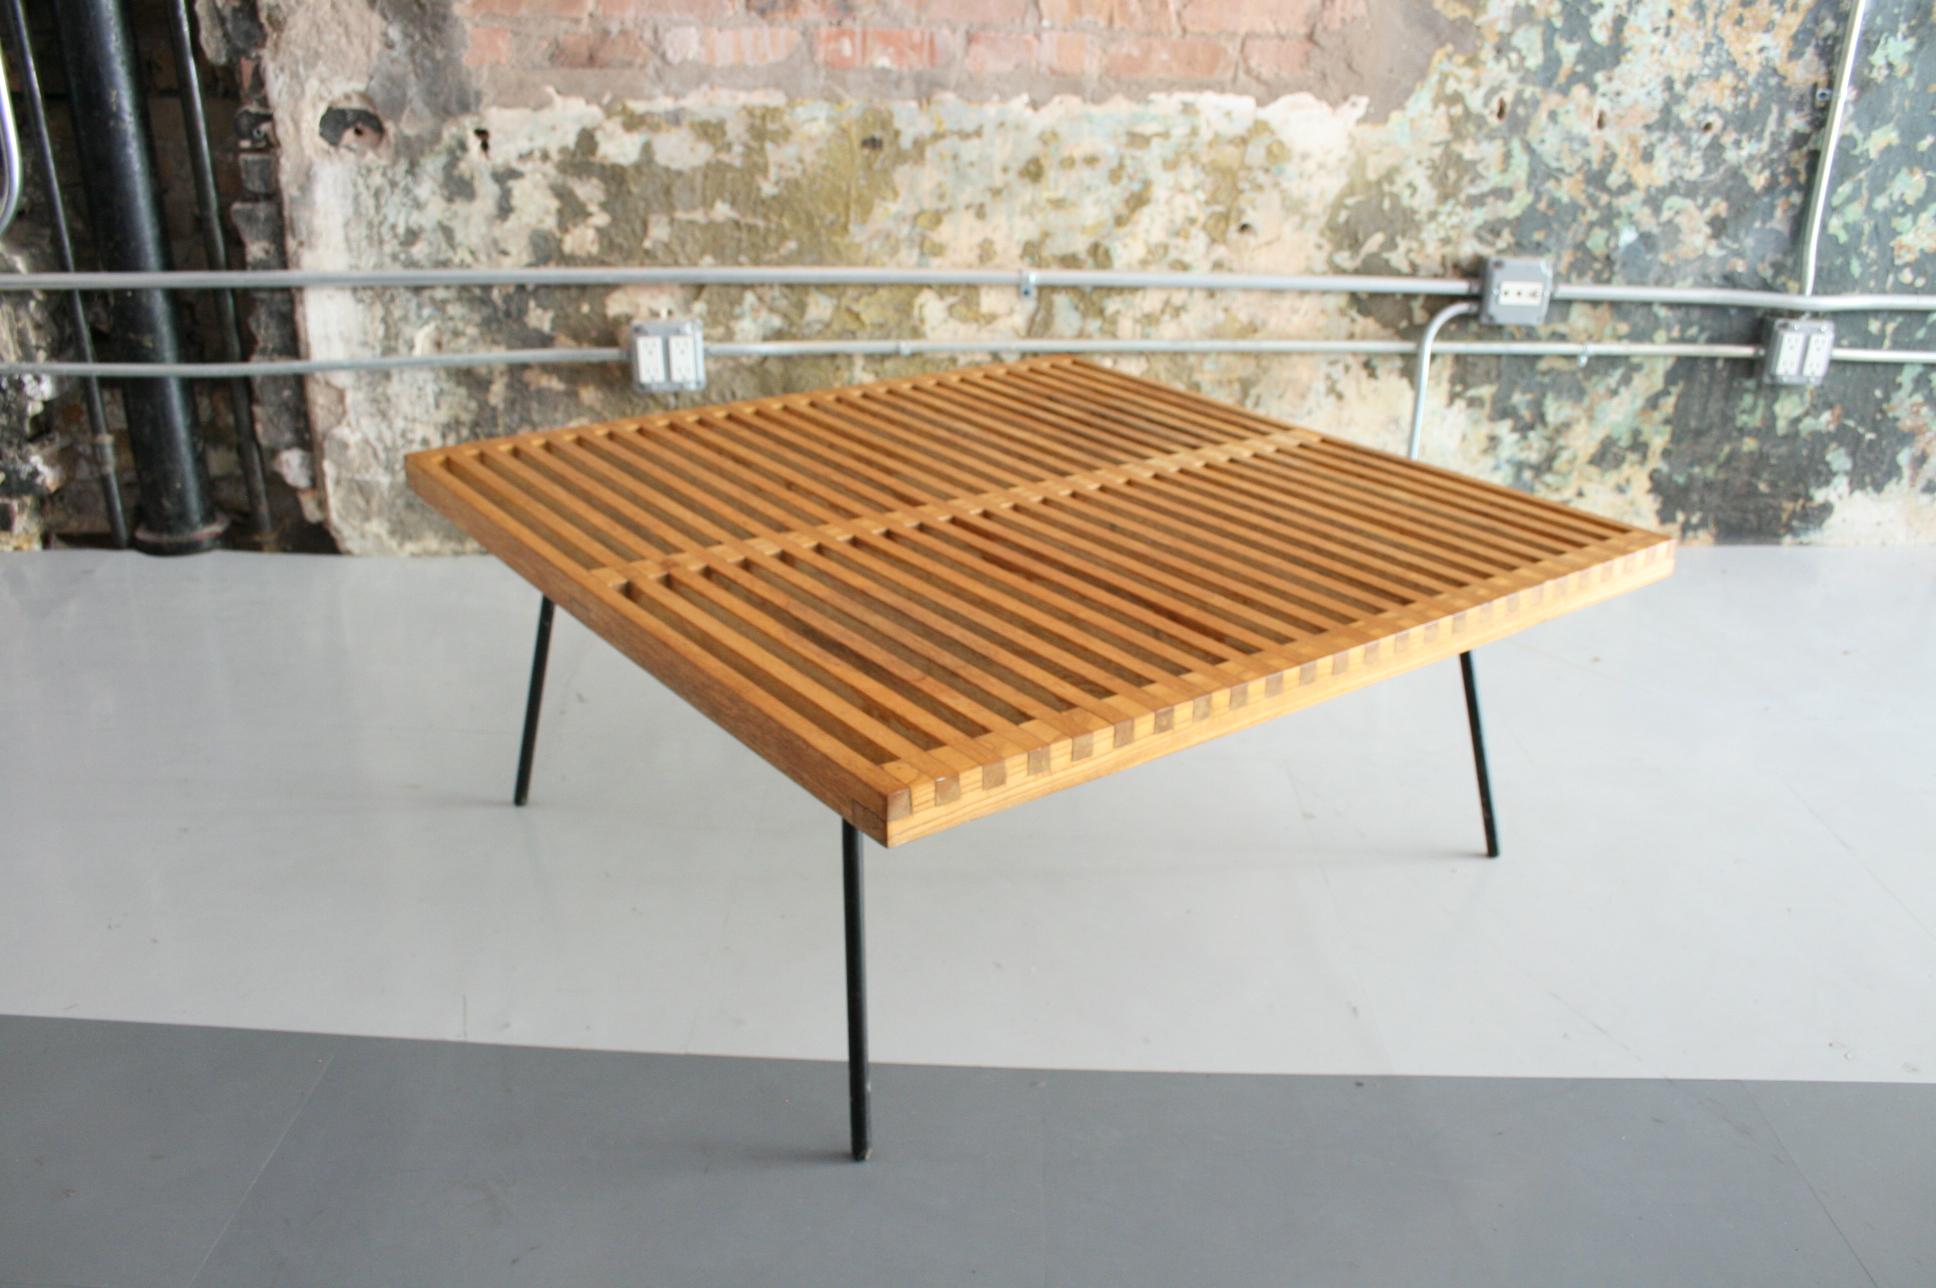 A beautifully crafted vintage table / bench in the Manner of George Nelson or Mel Smilow. Quite possibly a prototype of some sort but, regardless very much in the manner of a California Modern design. The table features stained Oak slats perched